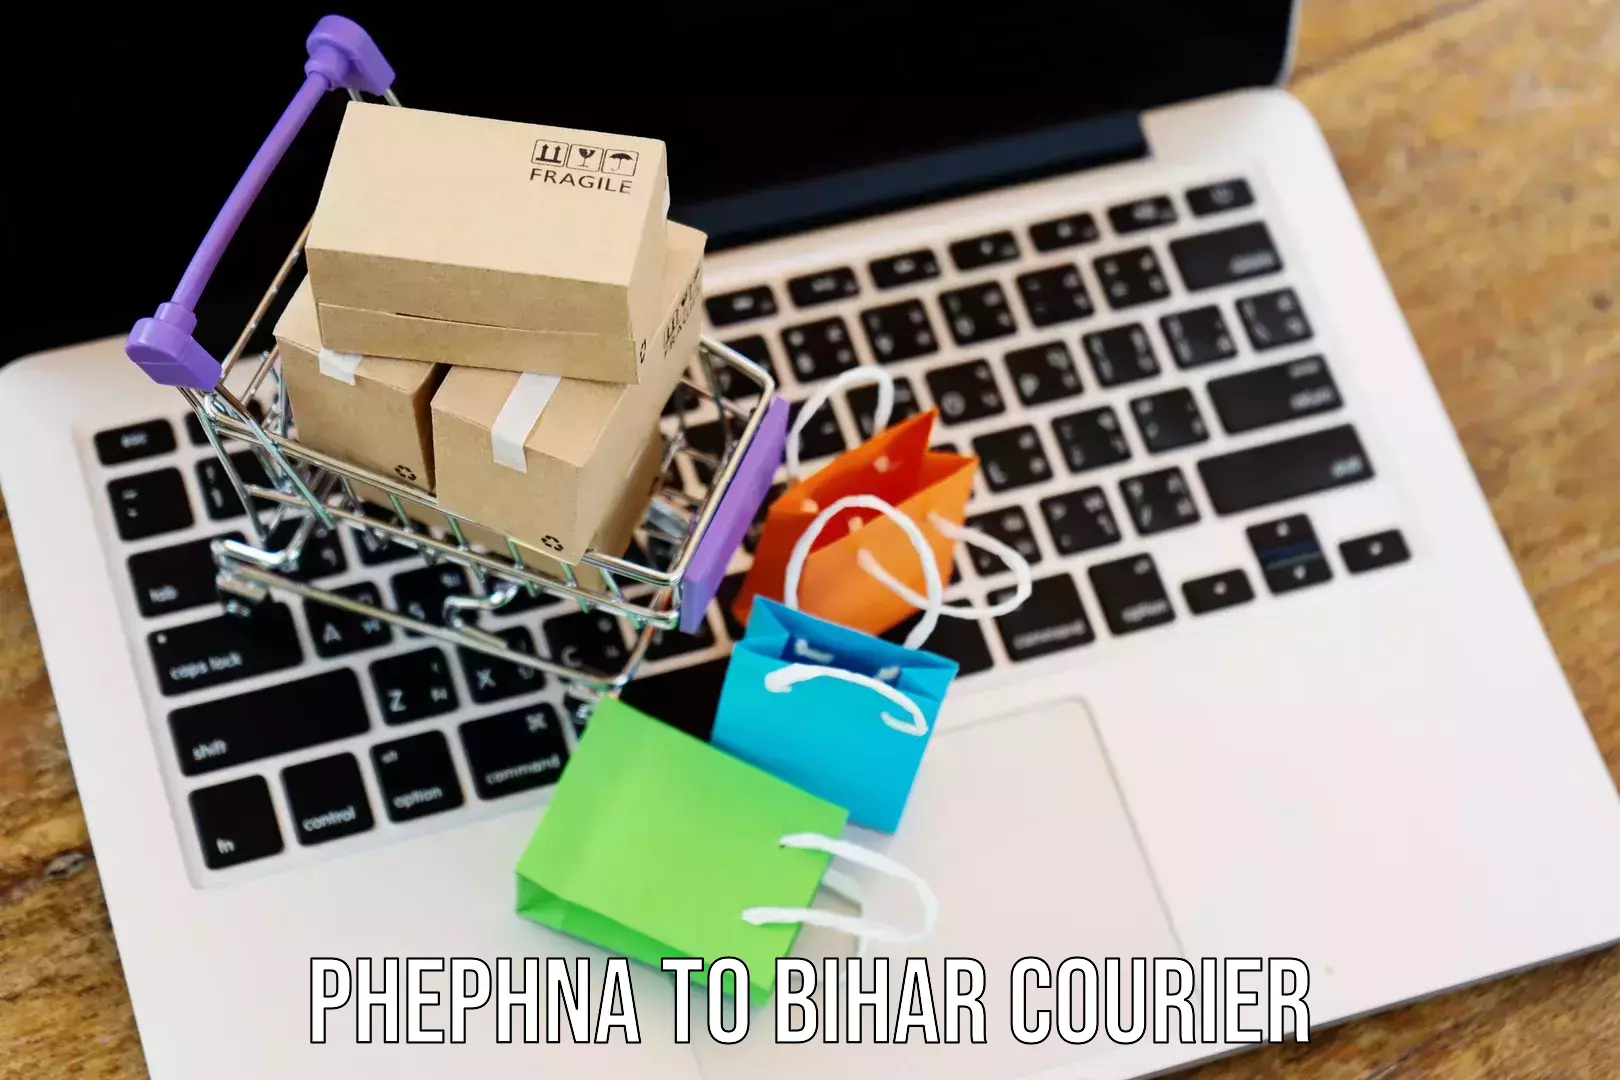 Fast-track shipping solutions Phephna to Bihar